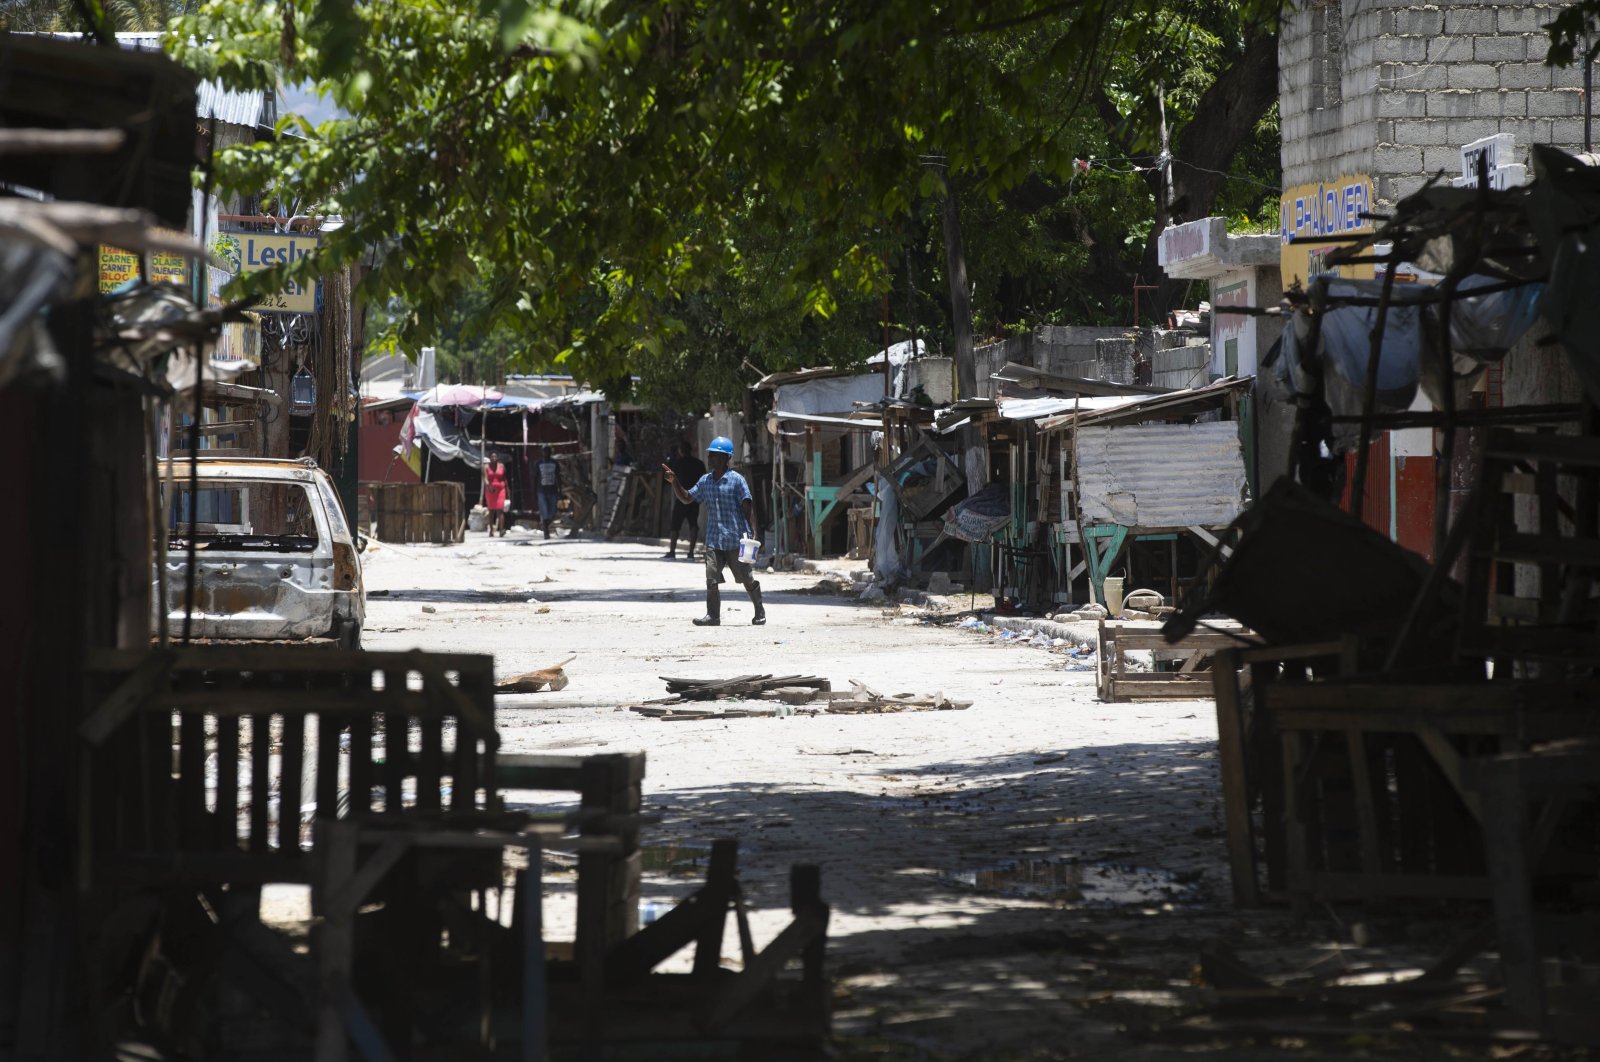 A man crosses a street barricaded during clashes between armed gangs in La Plaine neighborhood of Port-au-Prince, Haiti, May 6, 2022. (AP PHOTO)